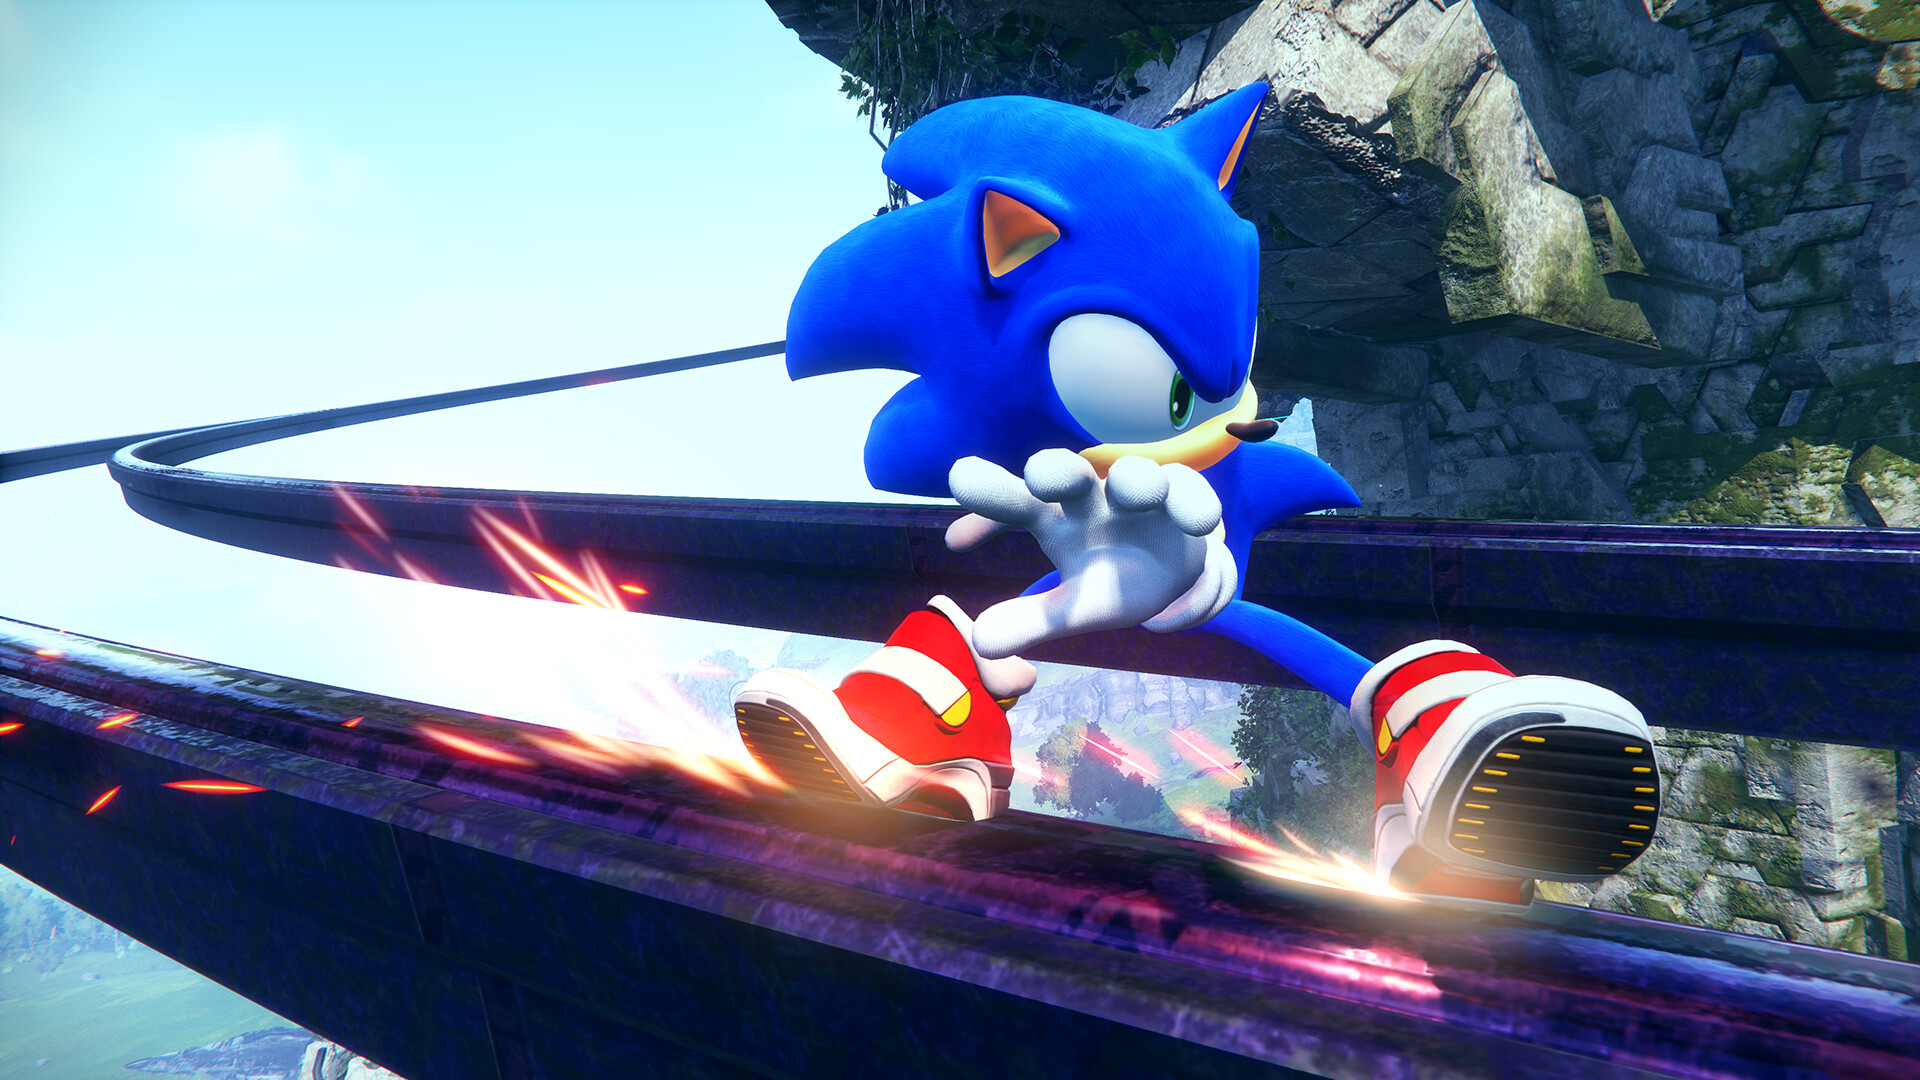 Sonic Frontiers Is Getting Free Monster Hunter Collaboration DLC